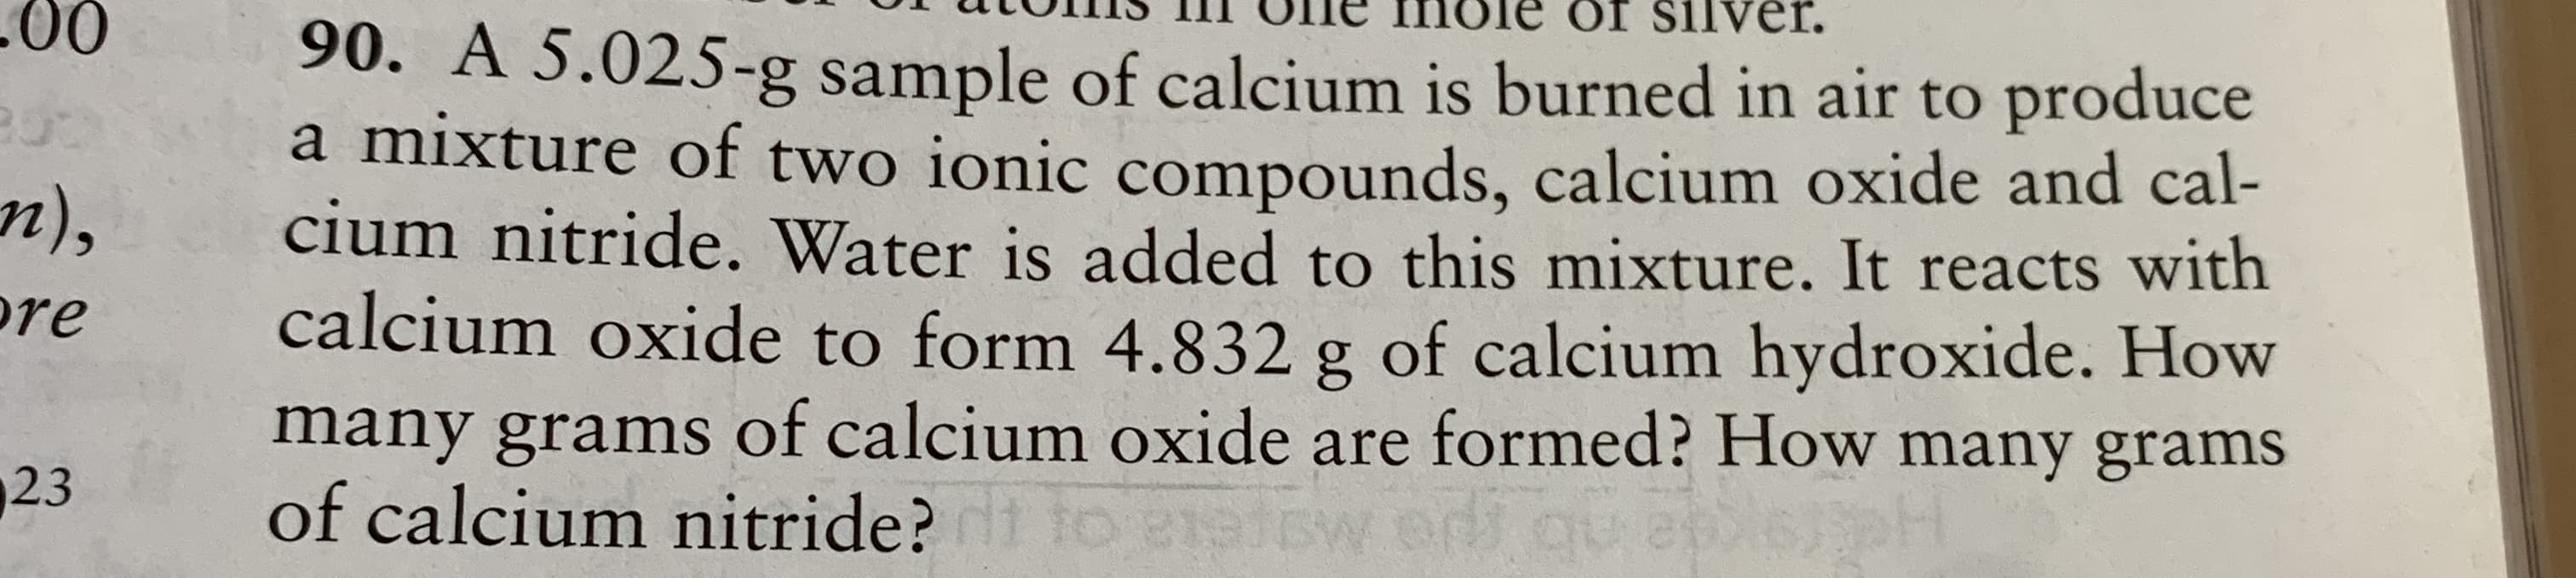 90. A 5.025-g sample of calcium is burned in air to produce
a mixture of two ionic compounds, calcium oxide and cal-
cium nitride. Water is added to this mixture. It reacts with
calcium oxide to form 4.832 g of calcium hydroxide. How
many grams of calcium oxide are formed? How many grams
of calcium nitride? to 21etsw
